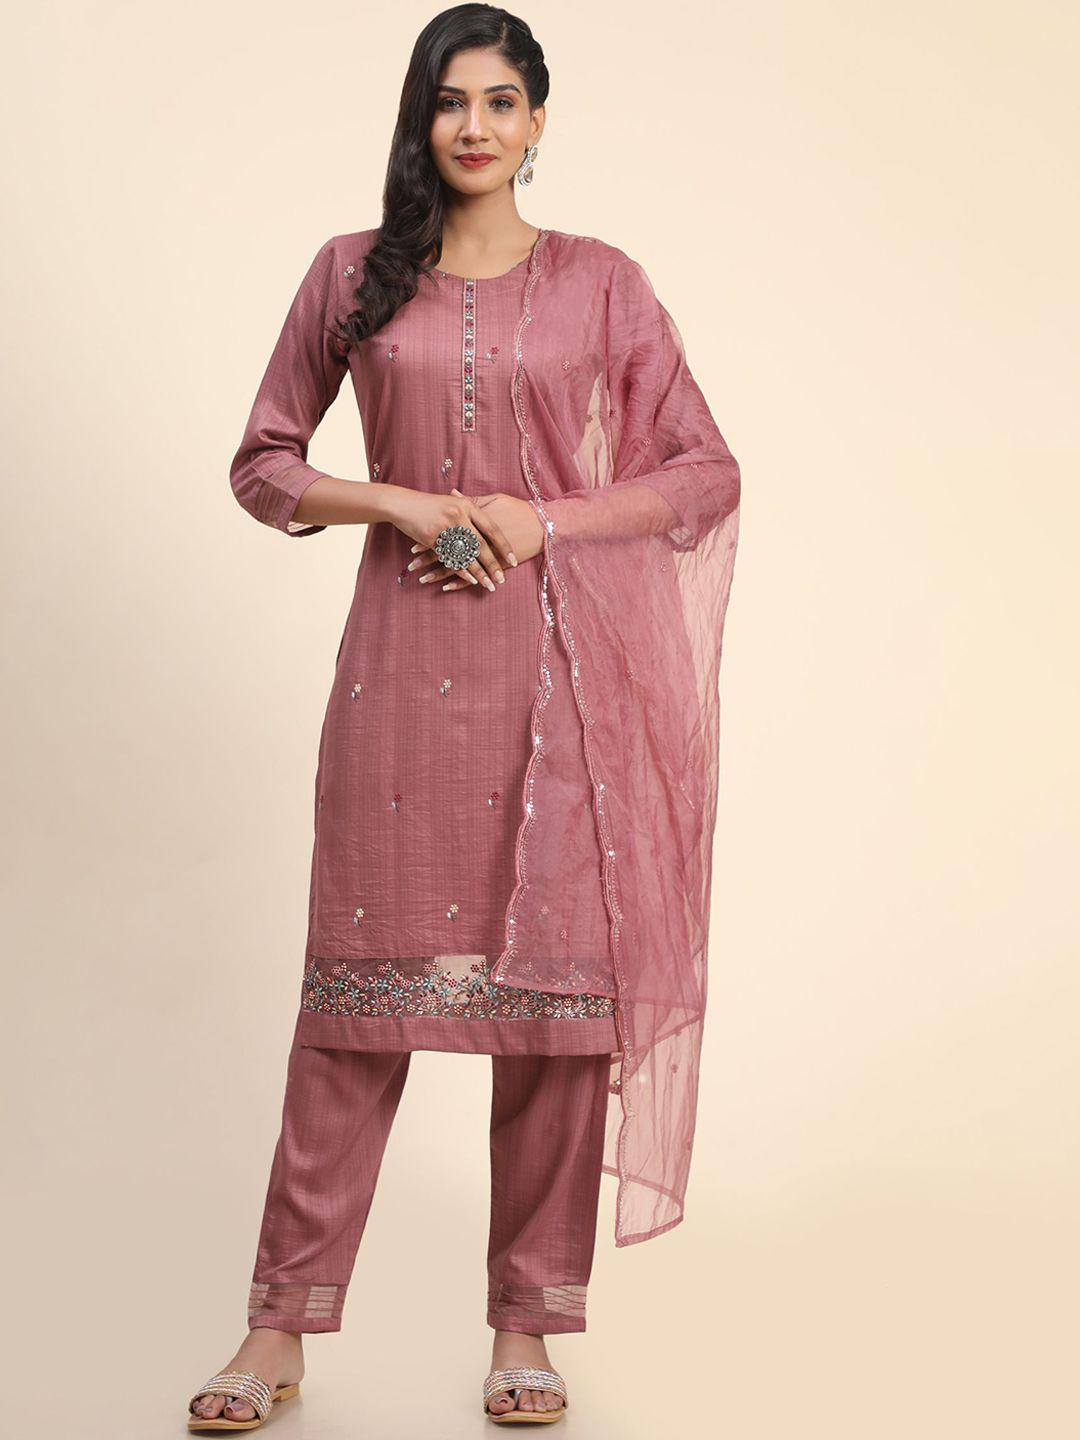 premroop--the-style-you-love-floral-embroidered-thread-work-kurta-&-trousers-with-dupatta